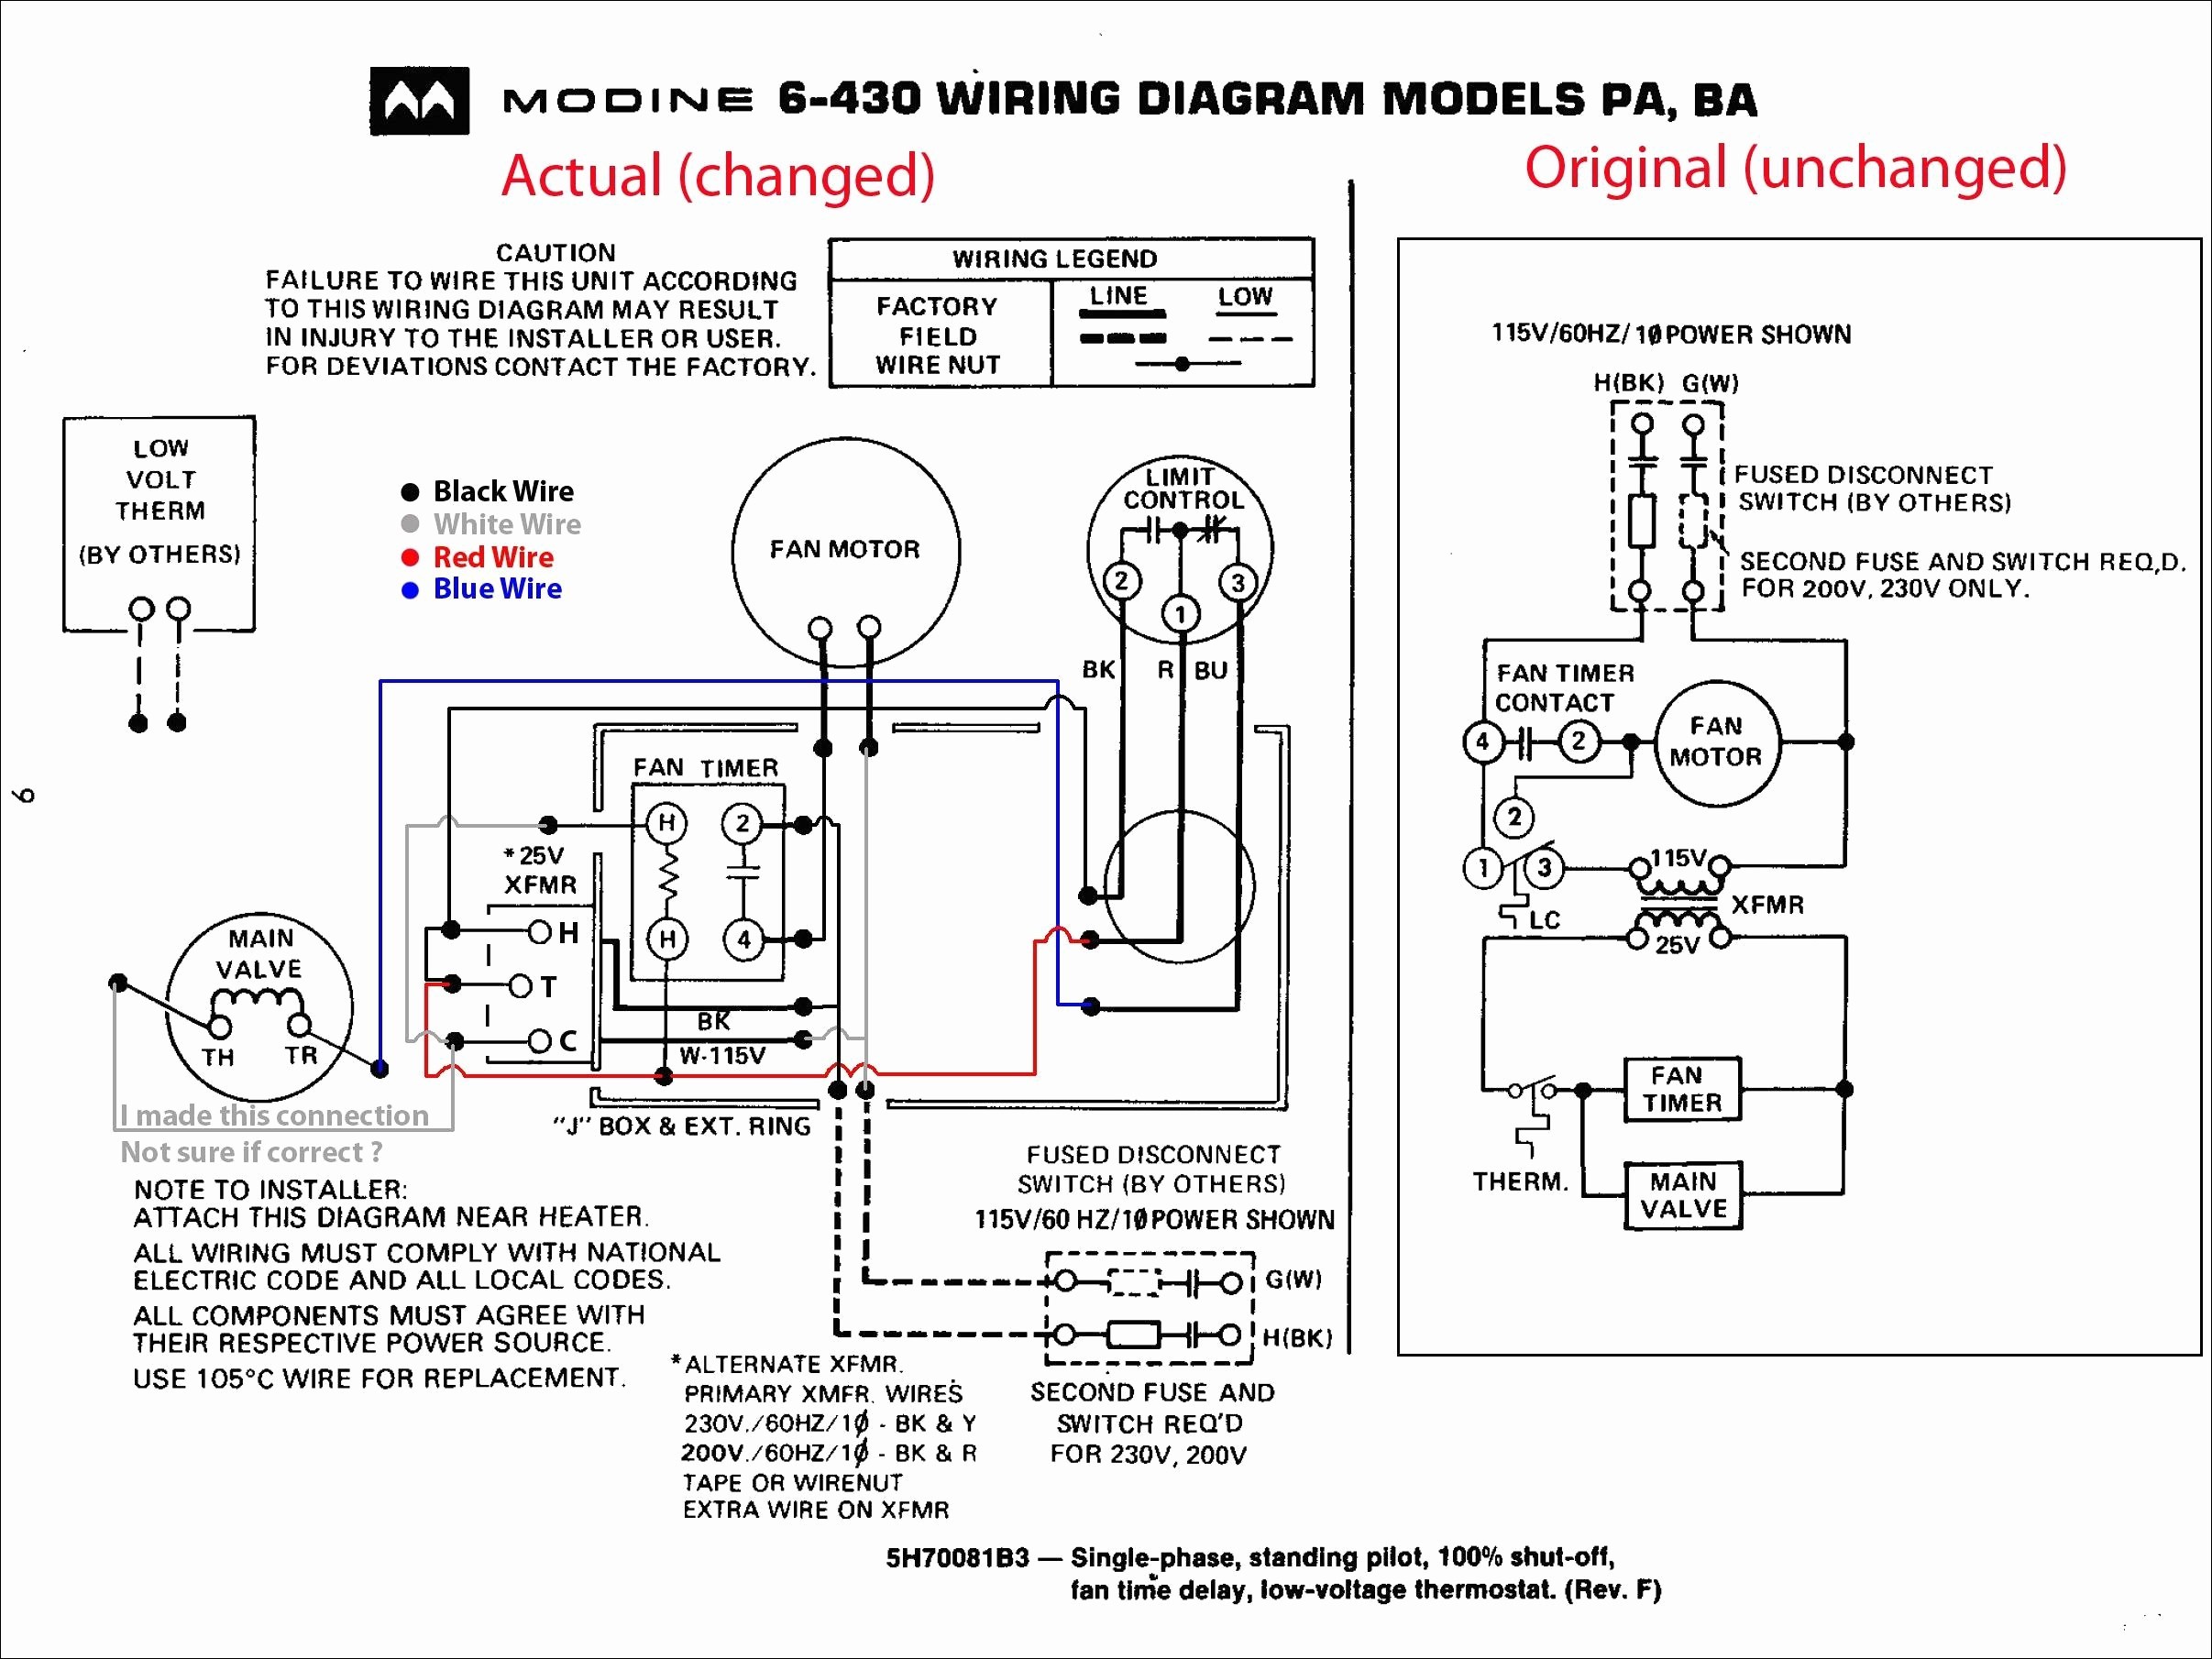 Wiring Diagram for Murray Ignition Switch Refrence Murray Lawn Mower Ignition Switch Wiring Diagram Luxury Intertherm